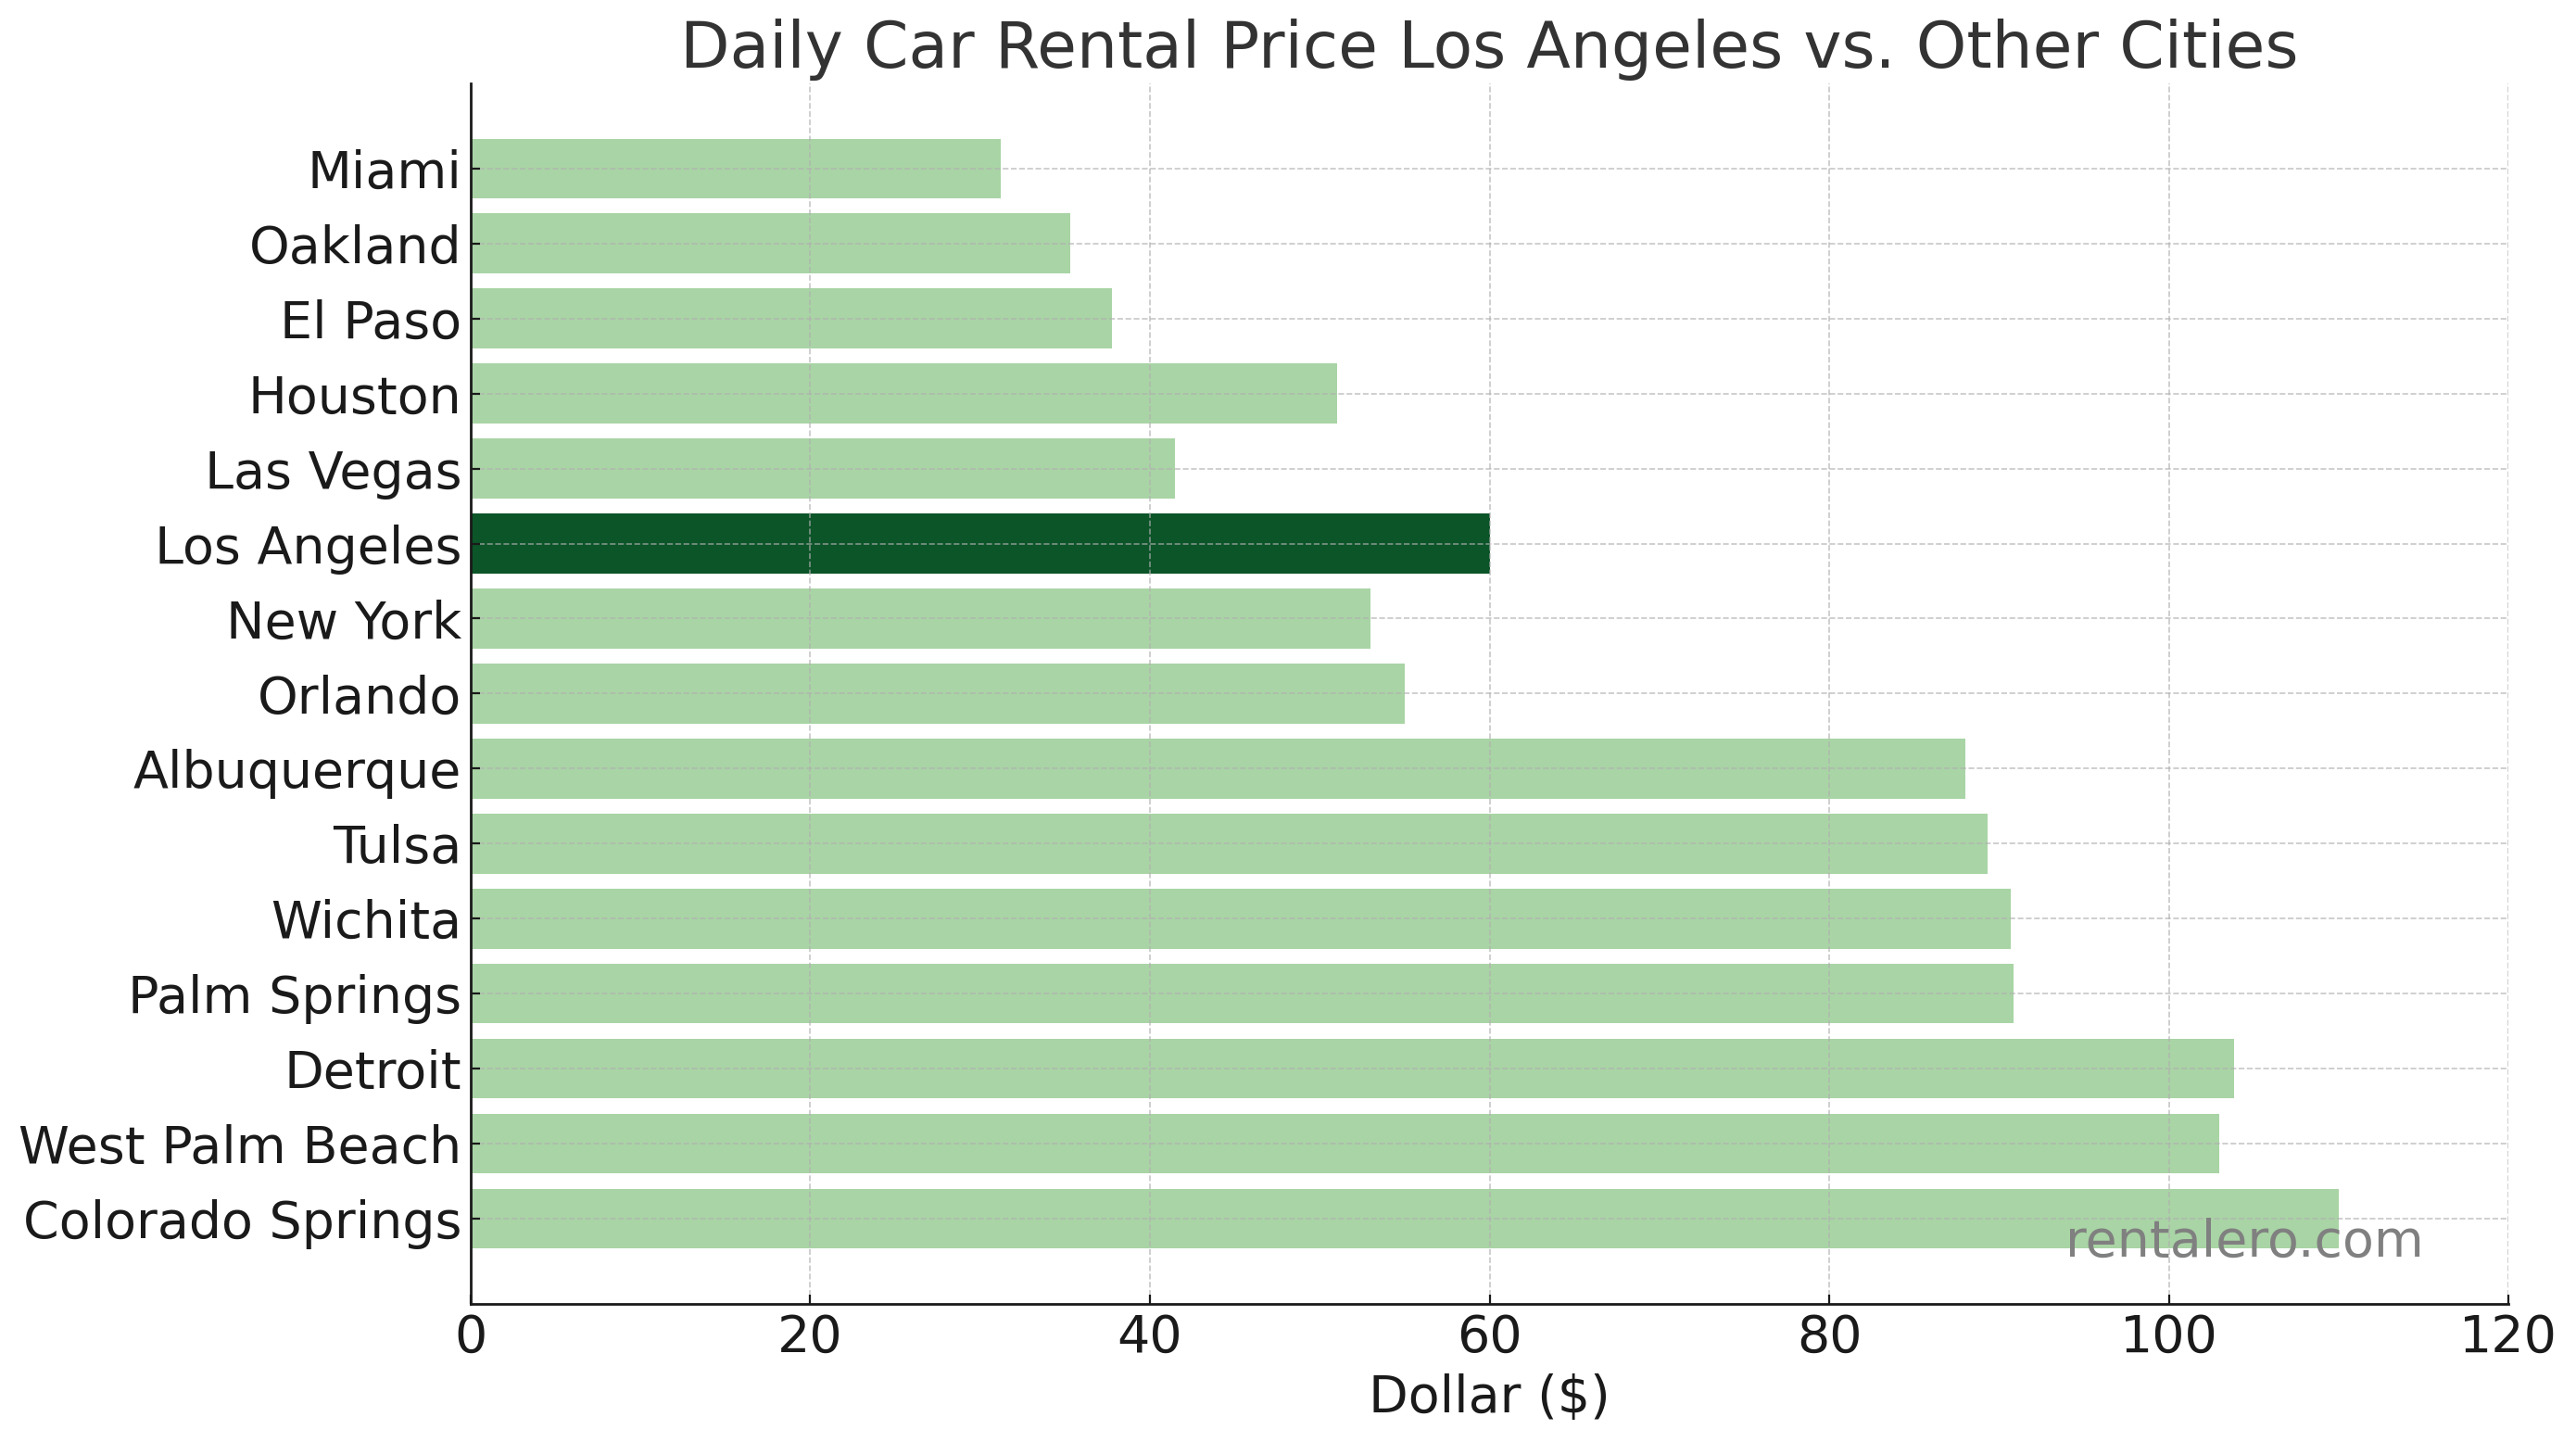 Los Angeles Car Rental Prices vs Other Cities